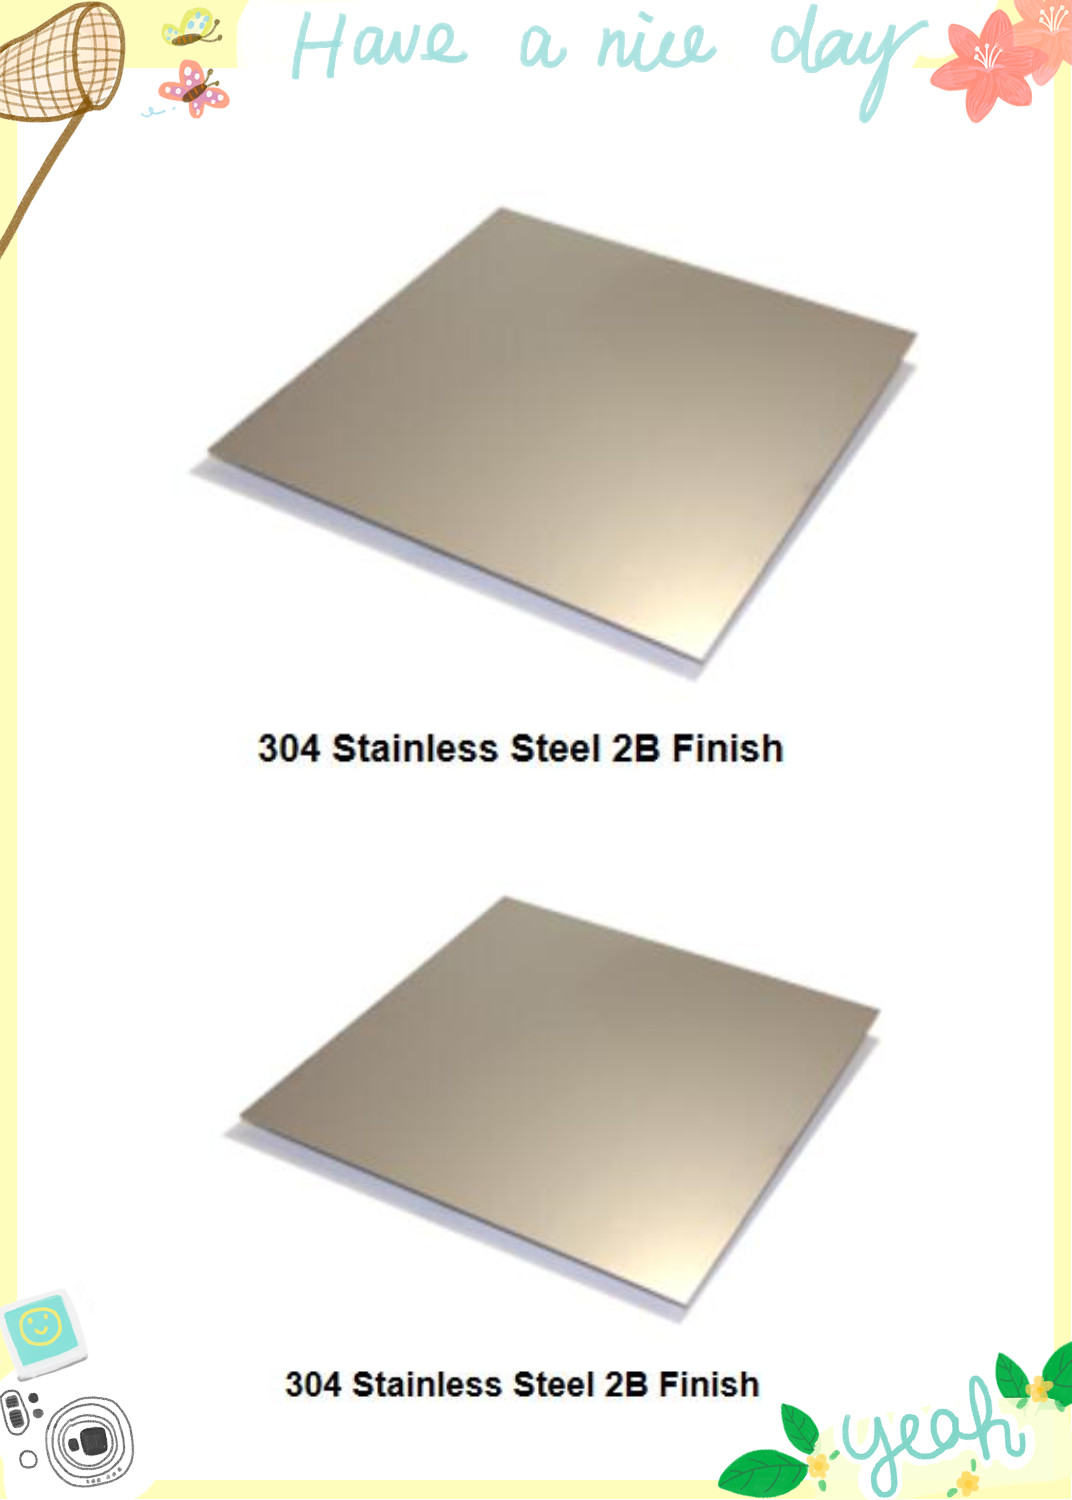 304 Stainless Steel 2B Finish